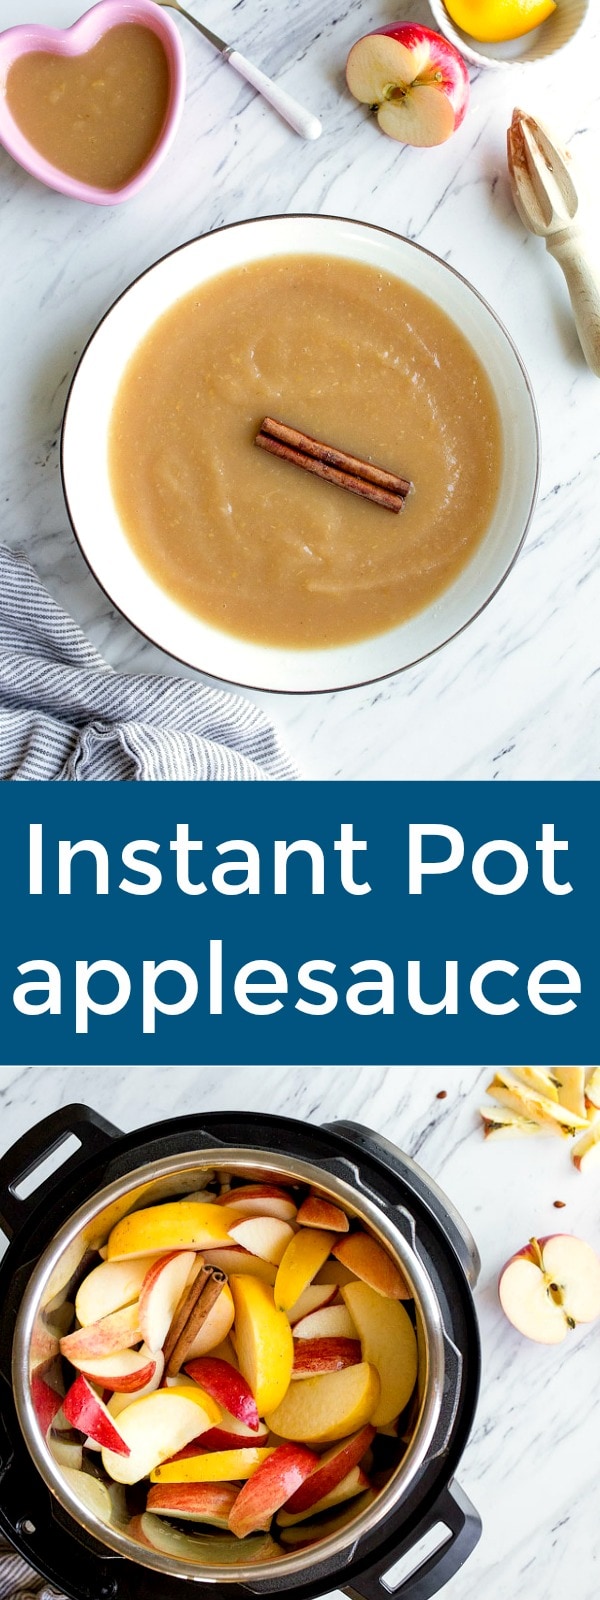 Instant Pot Applesauce recipe is so easy and perfect for kids or baby food apple puree! Just 5 minutes on high pressure.